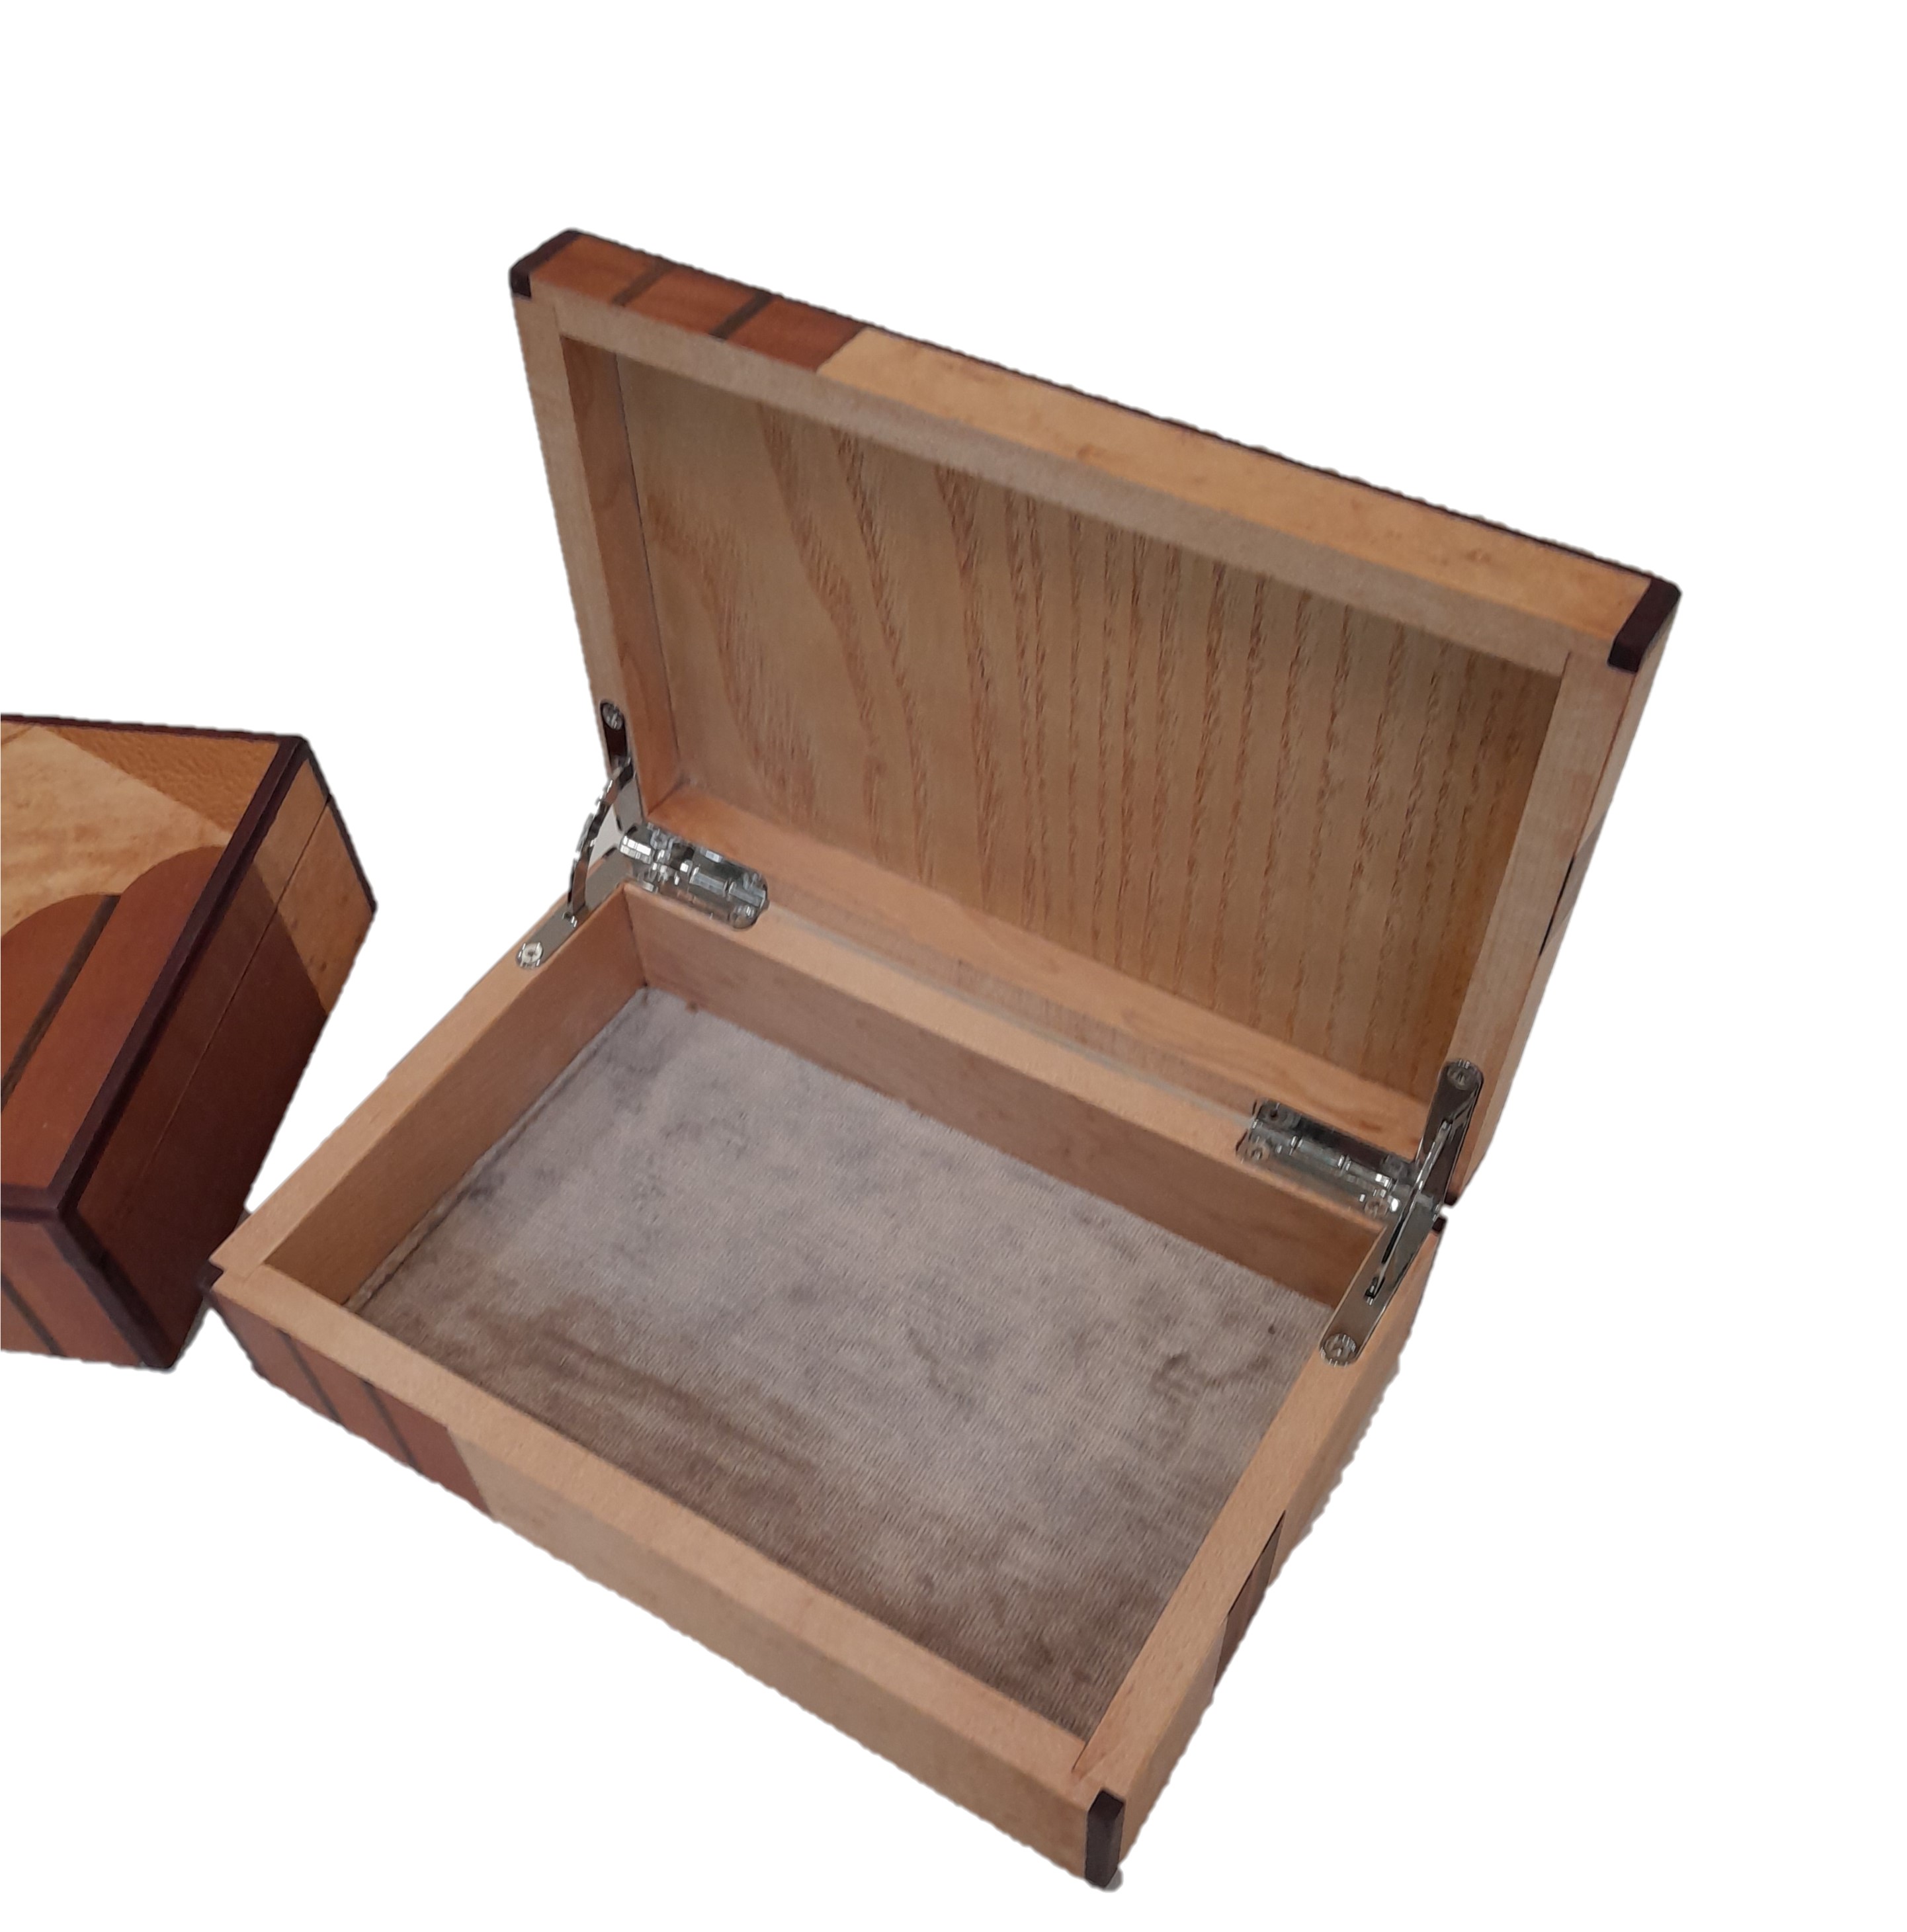 Pair Of Boxes 1669 - Click for details